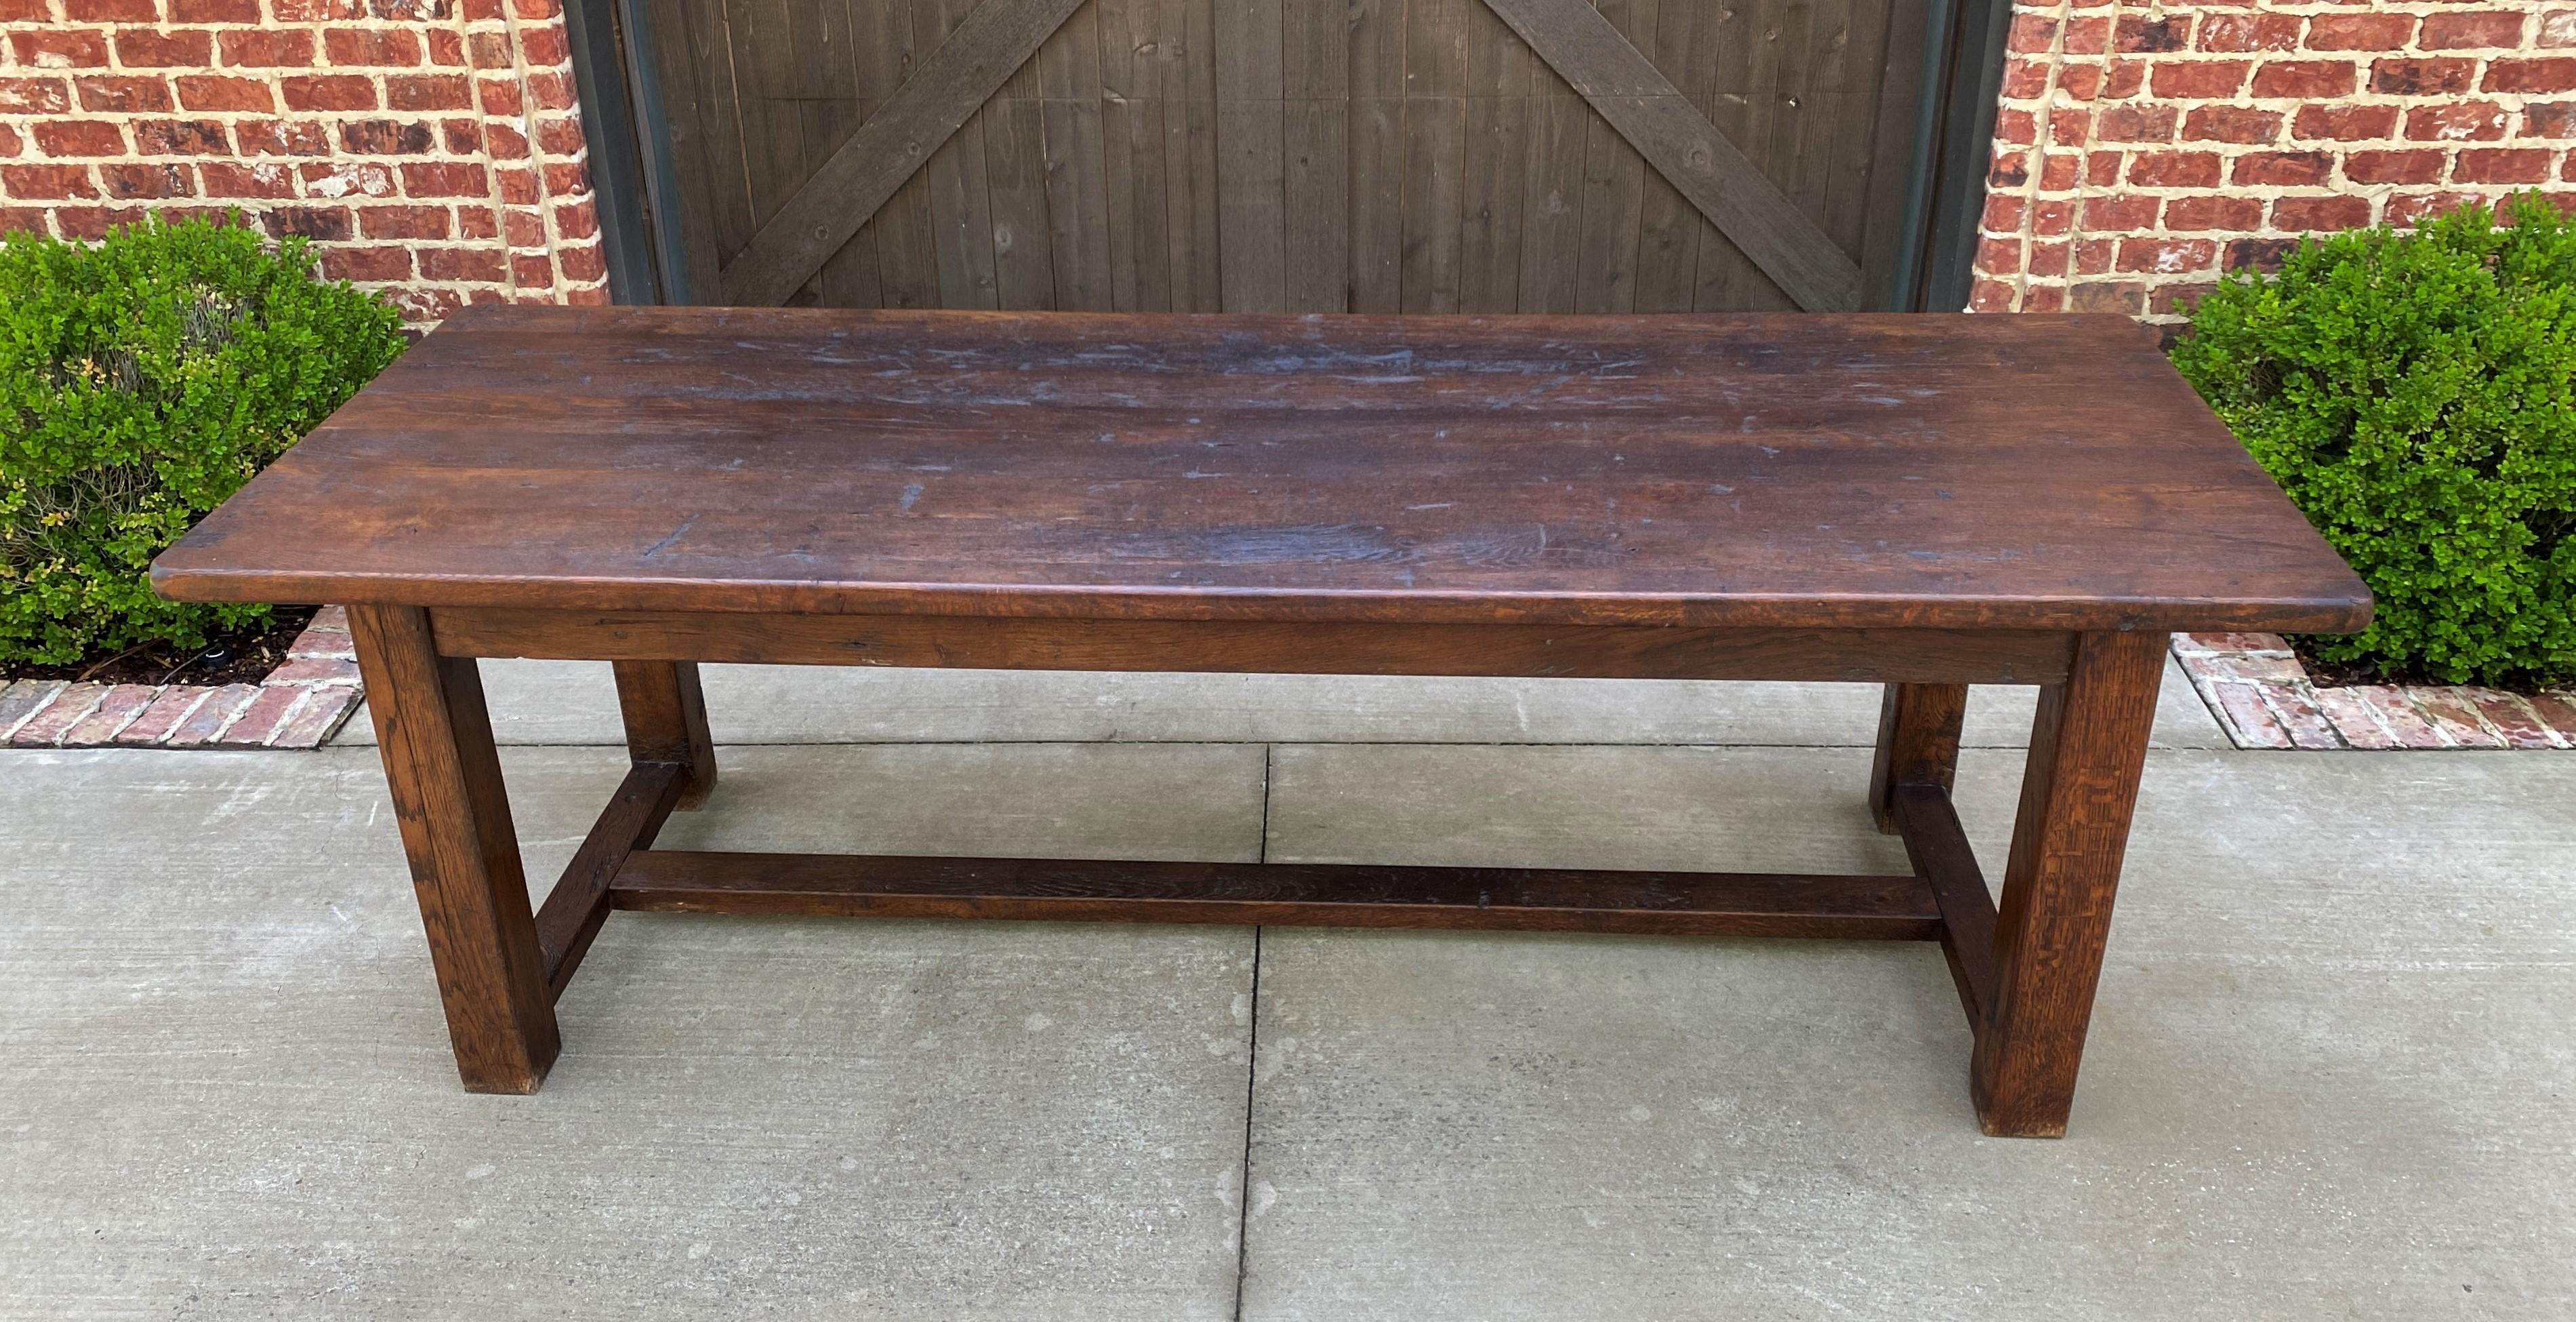 OUTSTANDING Antique French Country Oak Farm Farmhouse Dining Table Conference Library Table or Desk~~Rustic Top~~Pegged Construction~~Late 19th Century

 This table has 